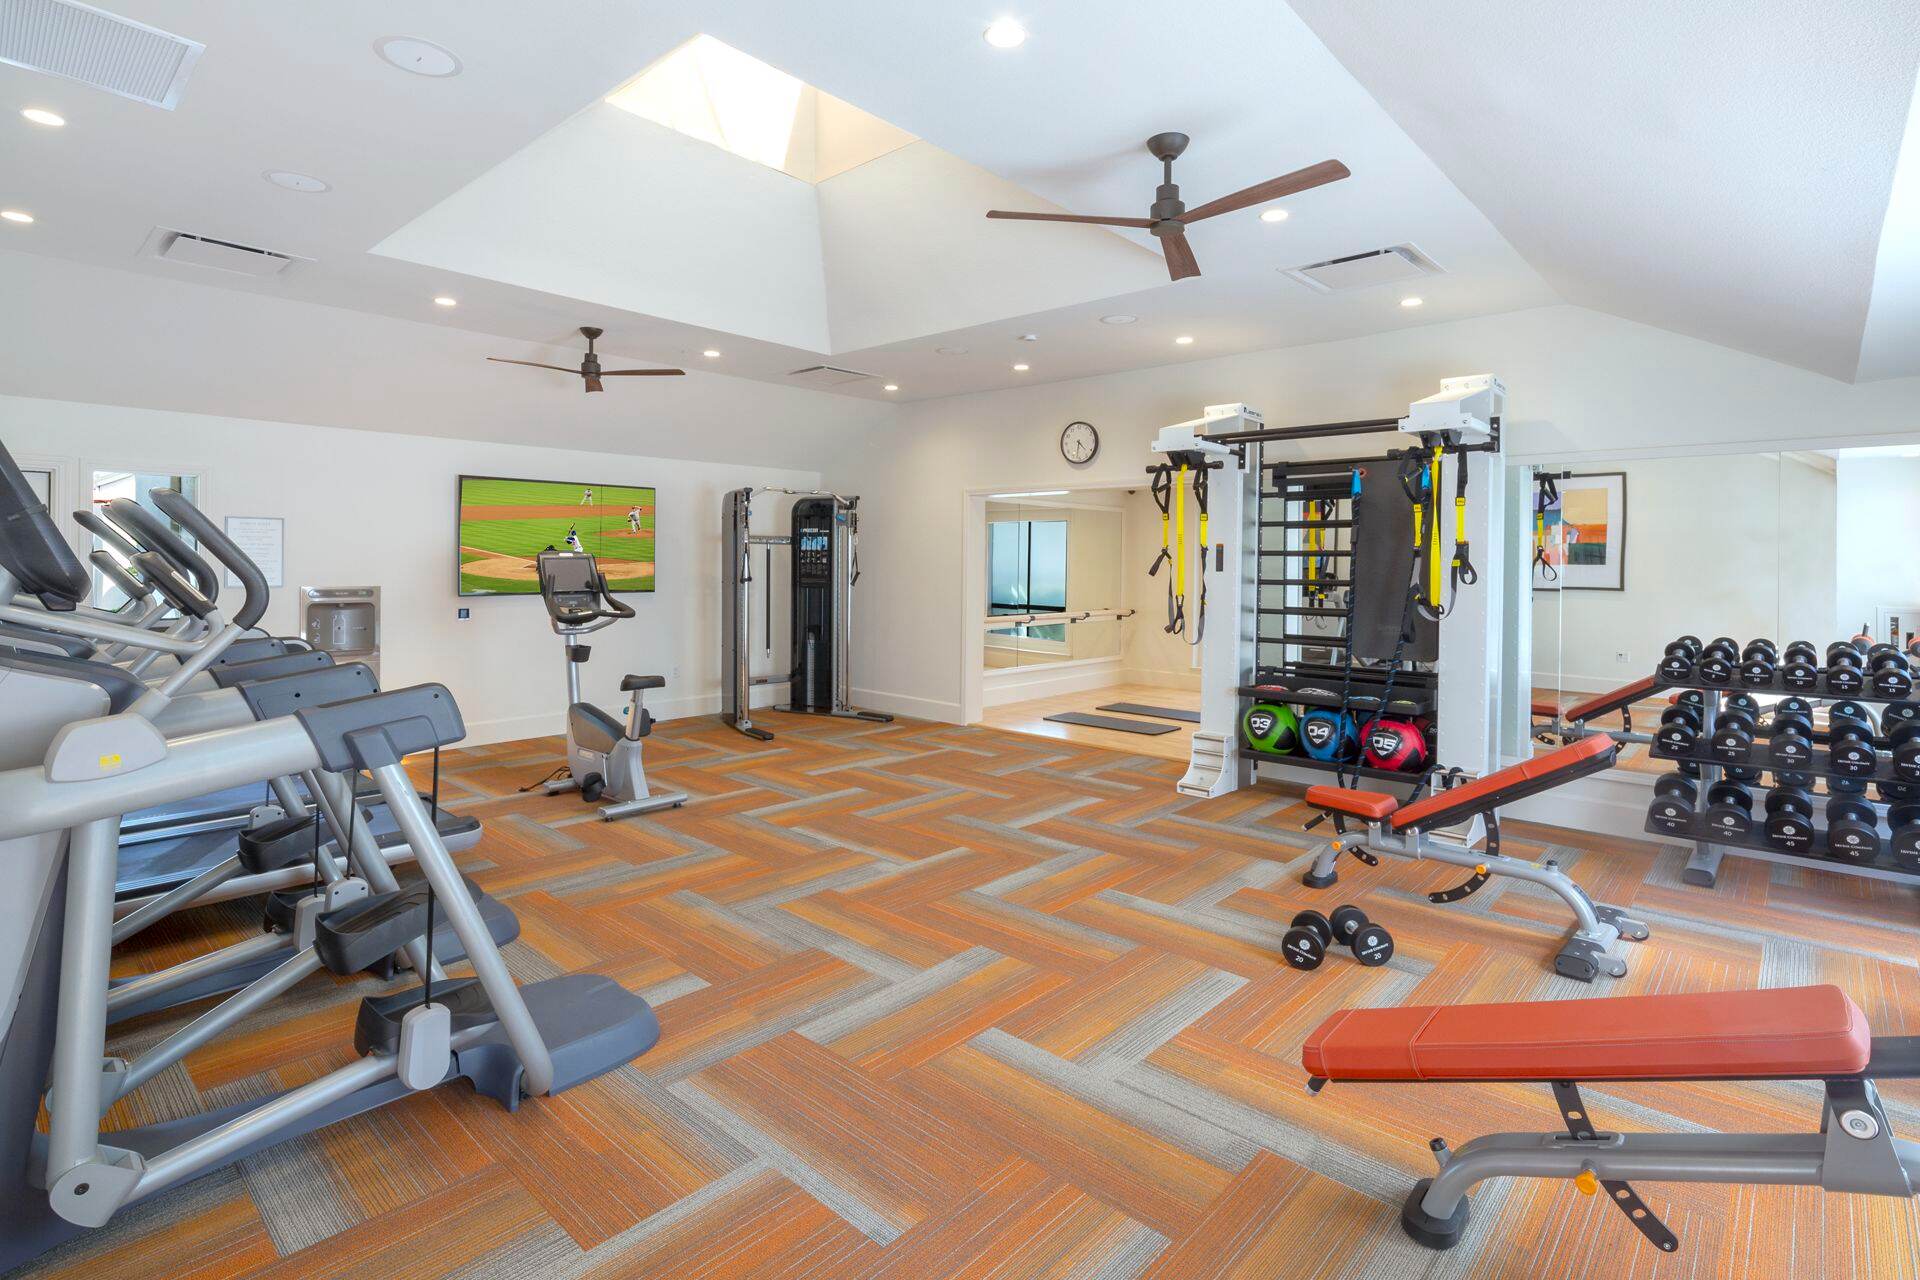 Interior view of fitness center at Northwood Place Apartment Homes in Irvine, CA.